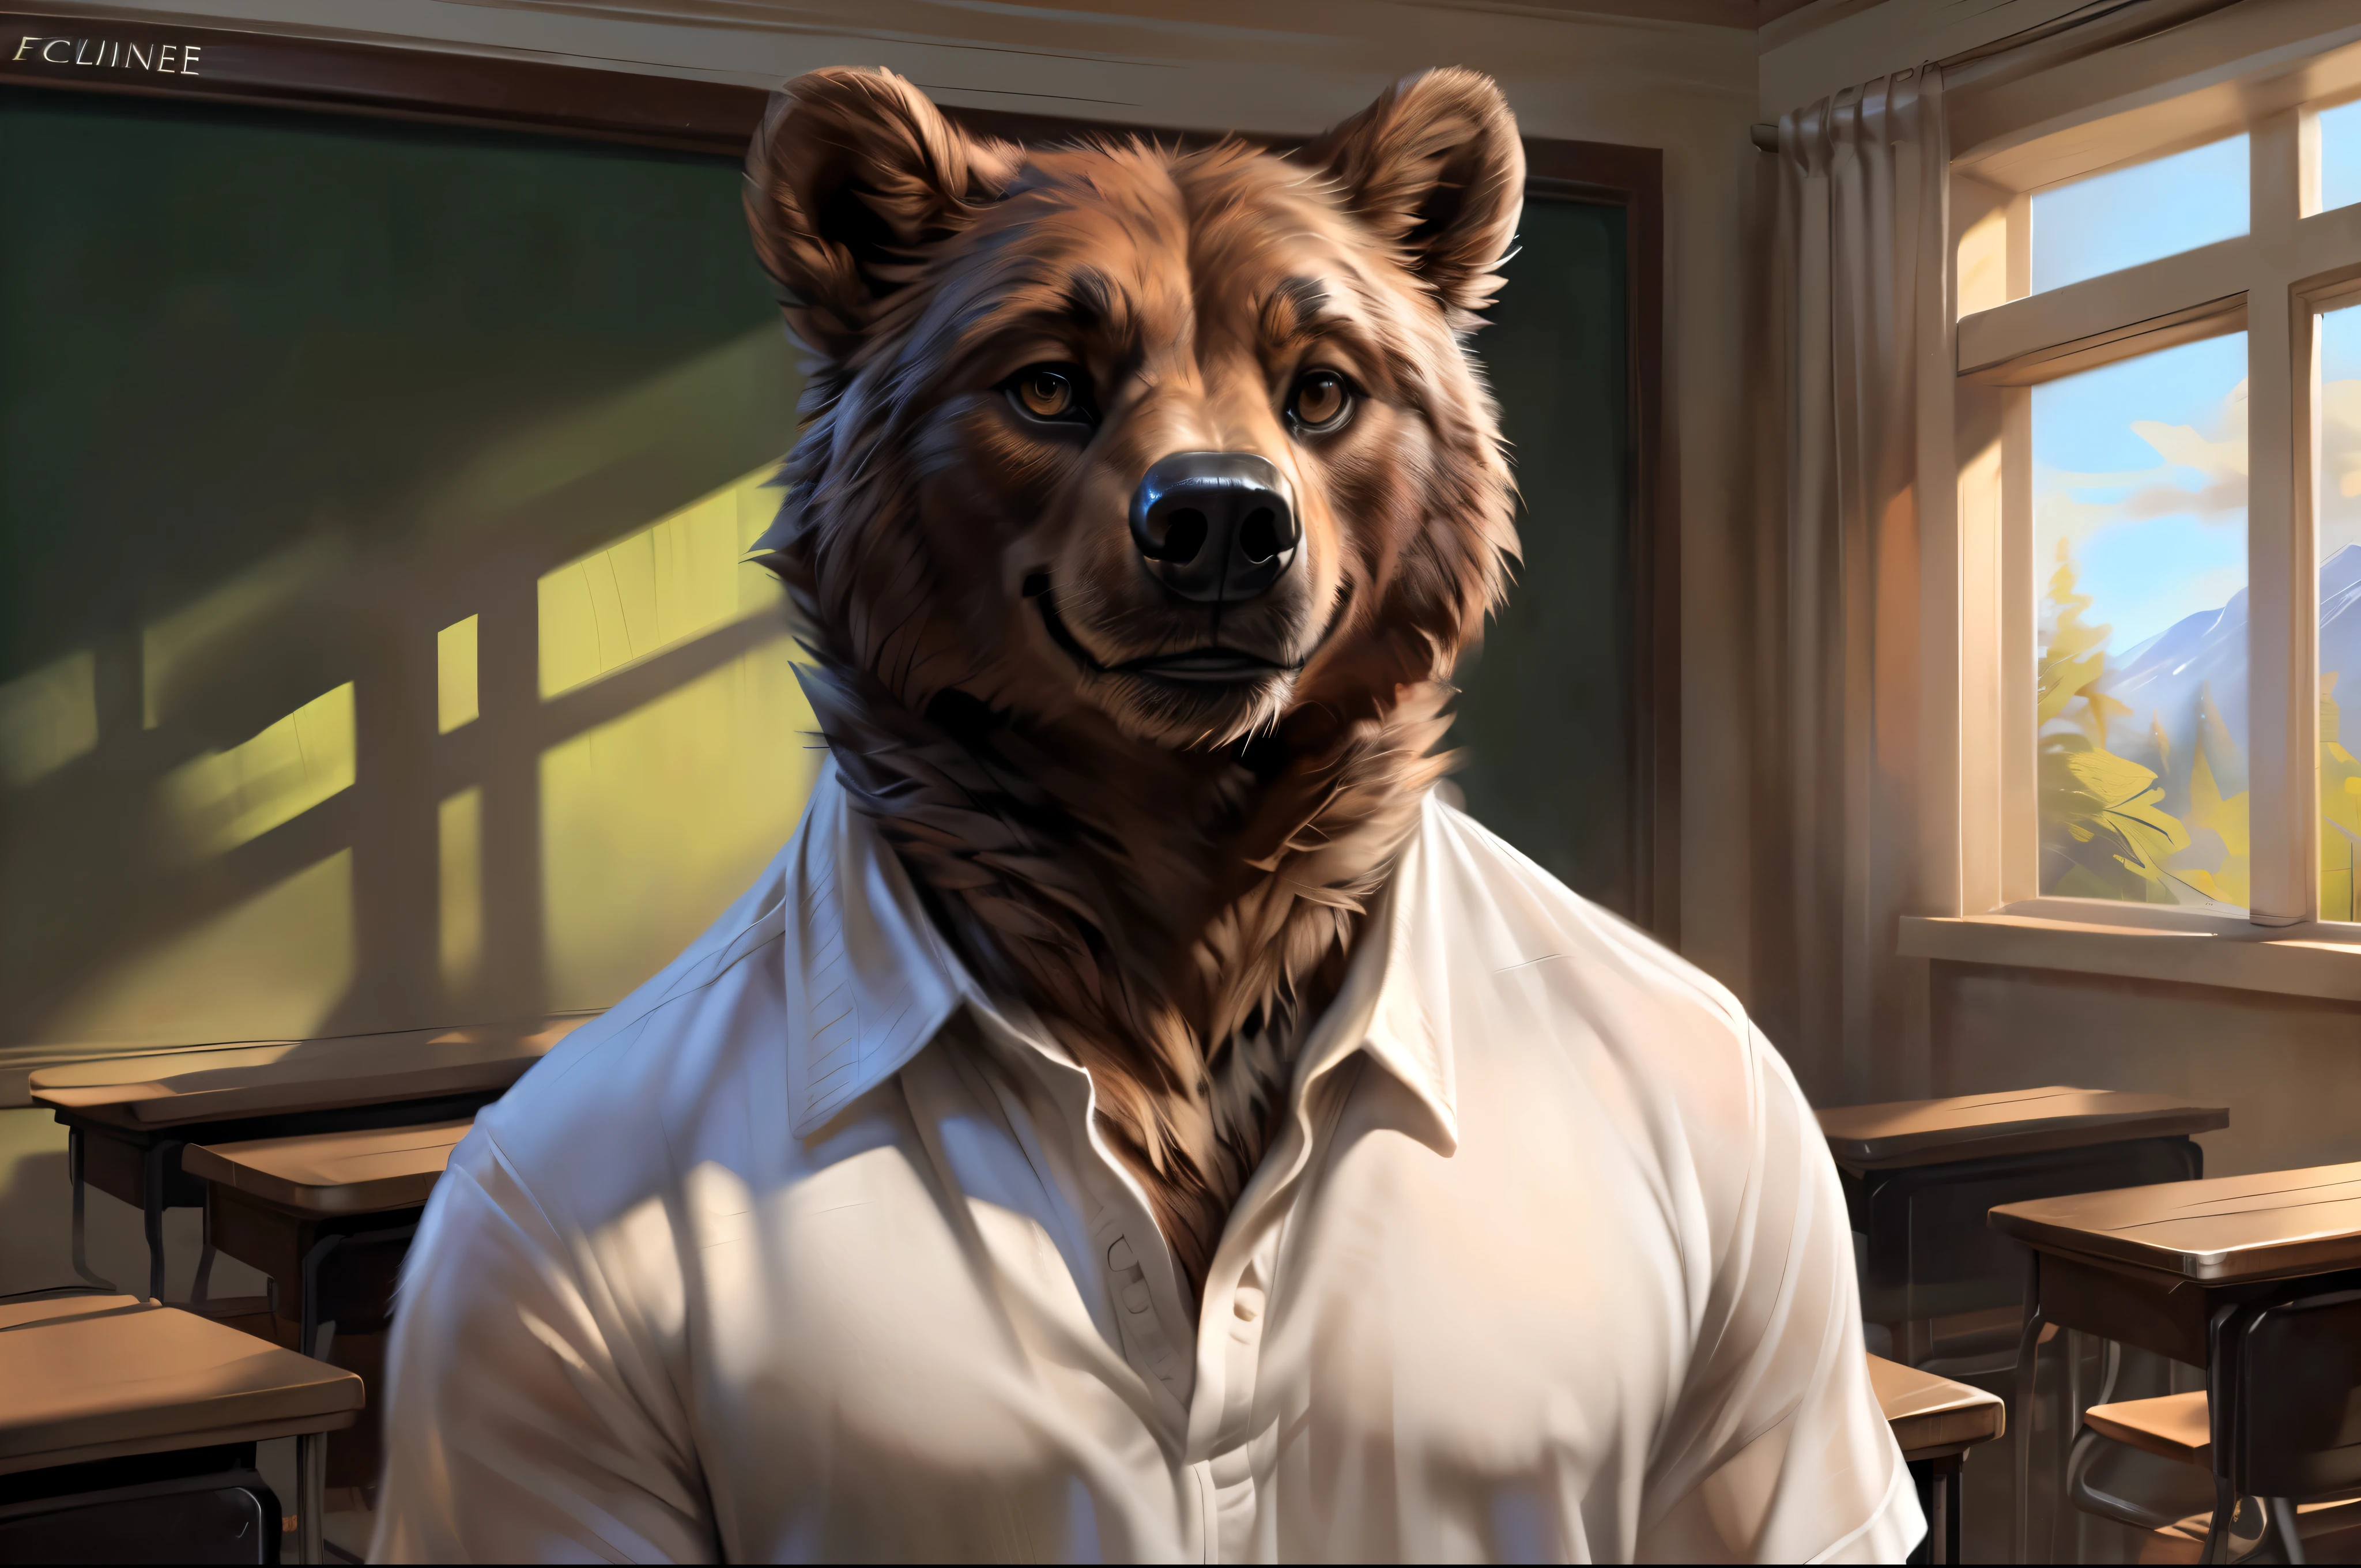 4k, high resolution, best quality, perfect colors, perfect shadows, perfect lighting, portrait shot, front view, posted on e621, furry body, solo, anthro brown bear, (monotone brown fur:1.3), male, correct anatomy, (photorealistic fur, detailed fur, epic, masterpiece:1.2), (by Taran Fiddler, by Chunie, by Rukis, Bonifasko lighting), detailed bear eyes, (white tank-top:1.4), looking at the camera, (solo, very young:1.4), chubby, (white shirt:1.4), school, classroom, (standing, smiling:1.2)